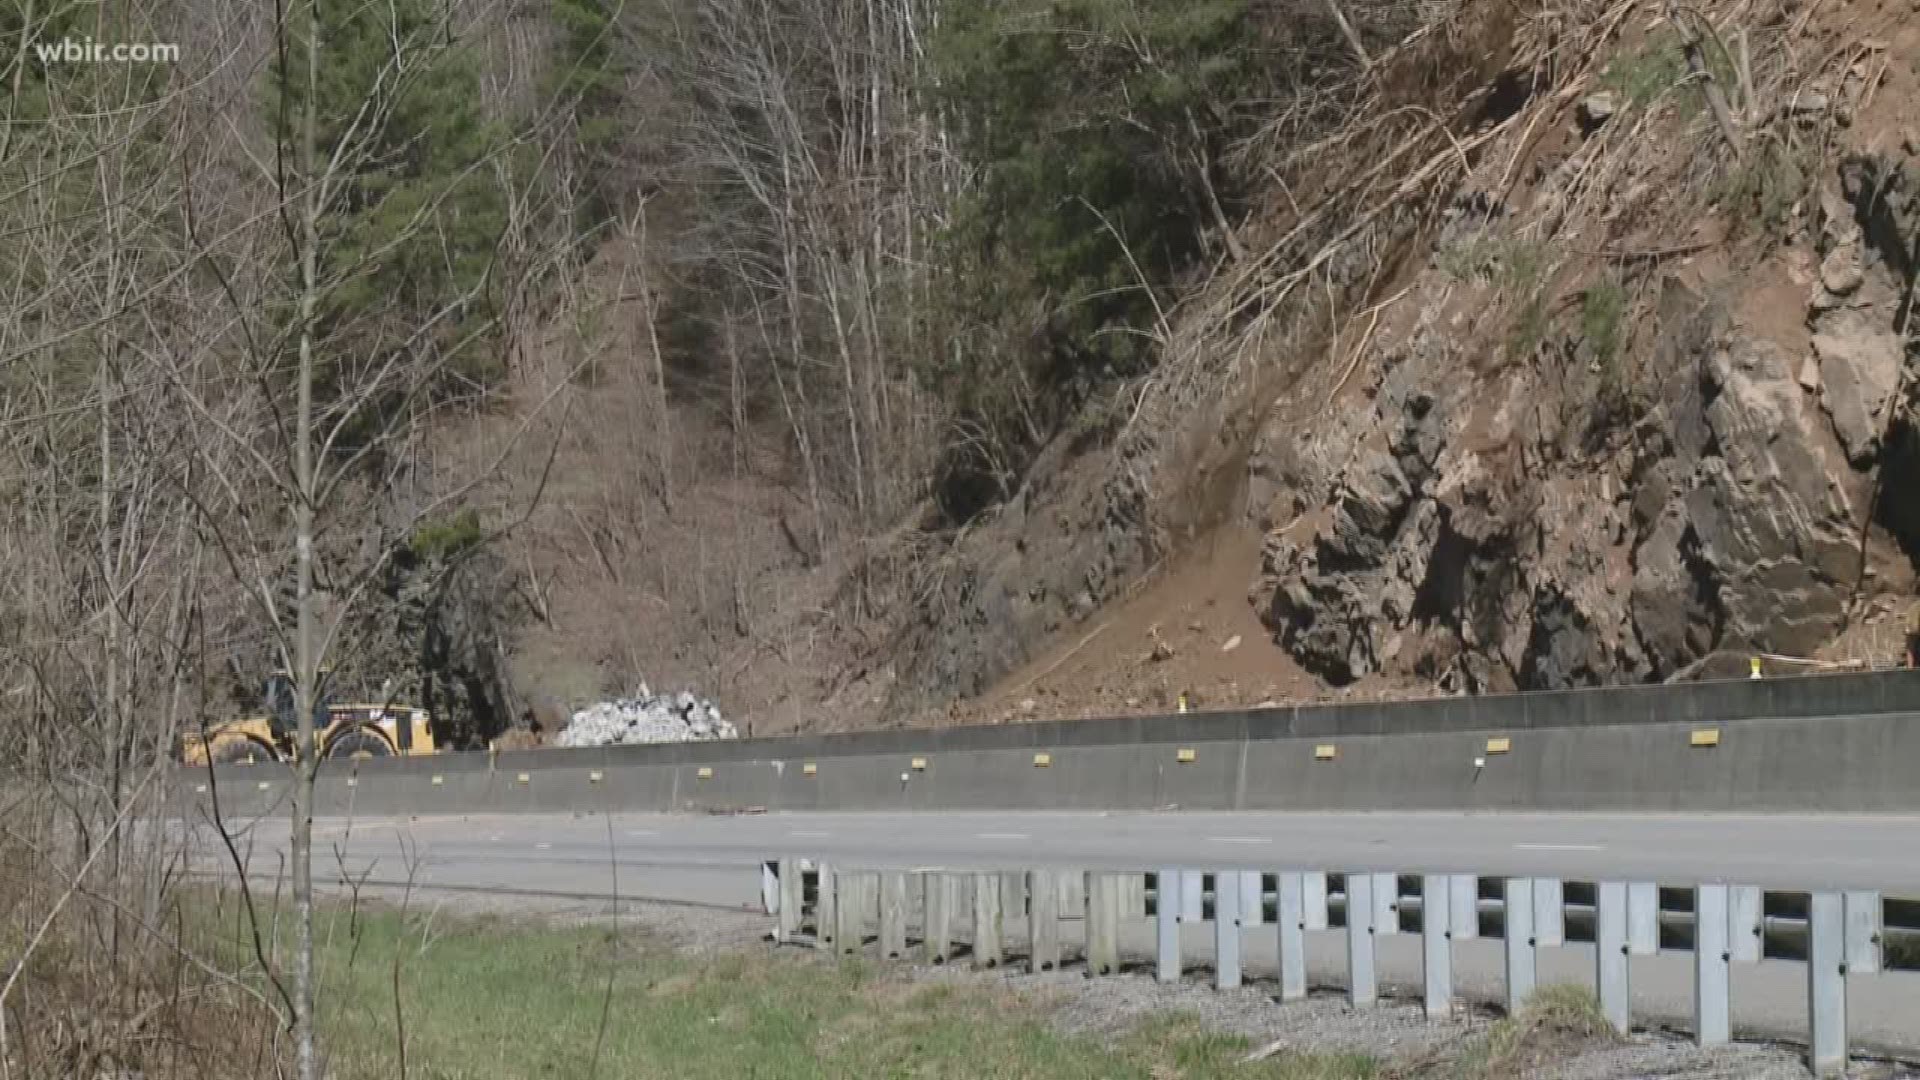 A rockslide closed traffic on Interstate 40 in both directions between the Tennessee/North Carolina state line and Asheville, at the 7 and a half milemarker just beyond the Harmon Den exit.